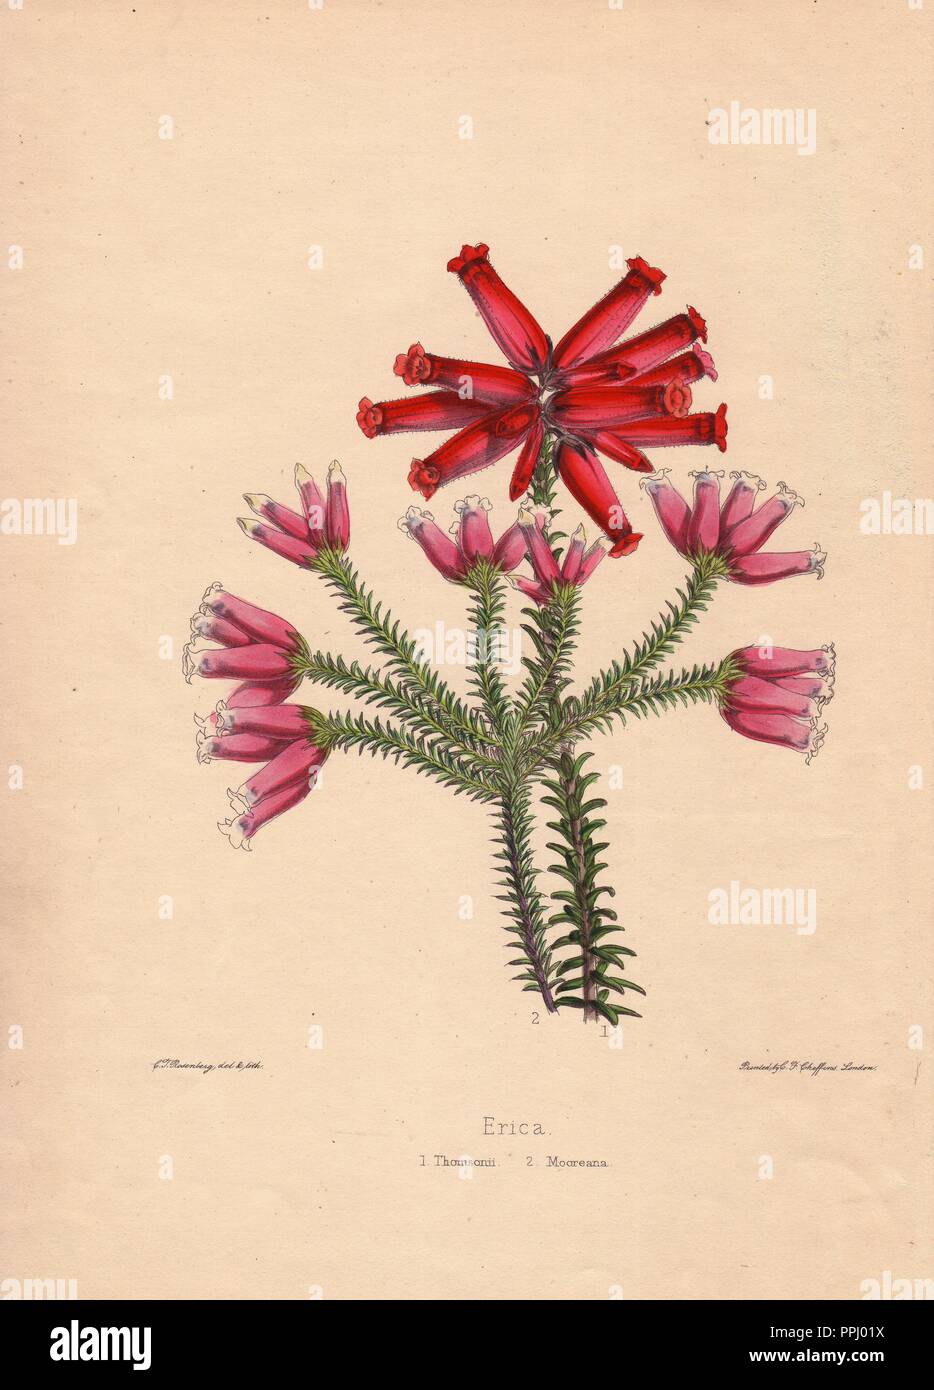 Erica varieties. Pink Thomsonii and scarlet Mooreana heaths. Drawn and zincographed by C. T. Rosenberg, for Thomas Moore's 'The Garden Companion and Florists' Guide,' 1852, published by Charles Frederick Cheffins.. . C.T. Rosenberg drew and engraved many botanicals for Moore's 'The Gardener's Magazine of Botany' and W.J. Hooker's 'Curtis's Botanical Magazine' in the middle of the 19th century. Moore (1821-1887) was the curator of the Botanic Garden, Chelsea, from 1847 until his death. Stock Photo